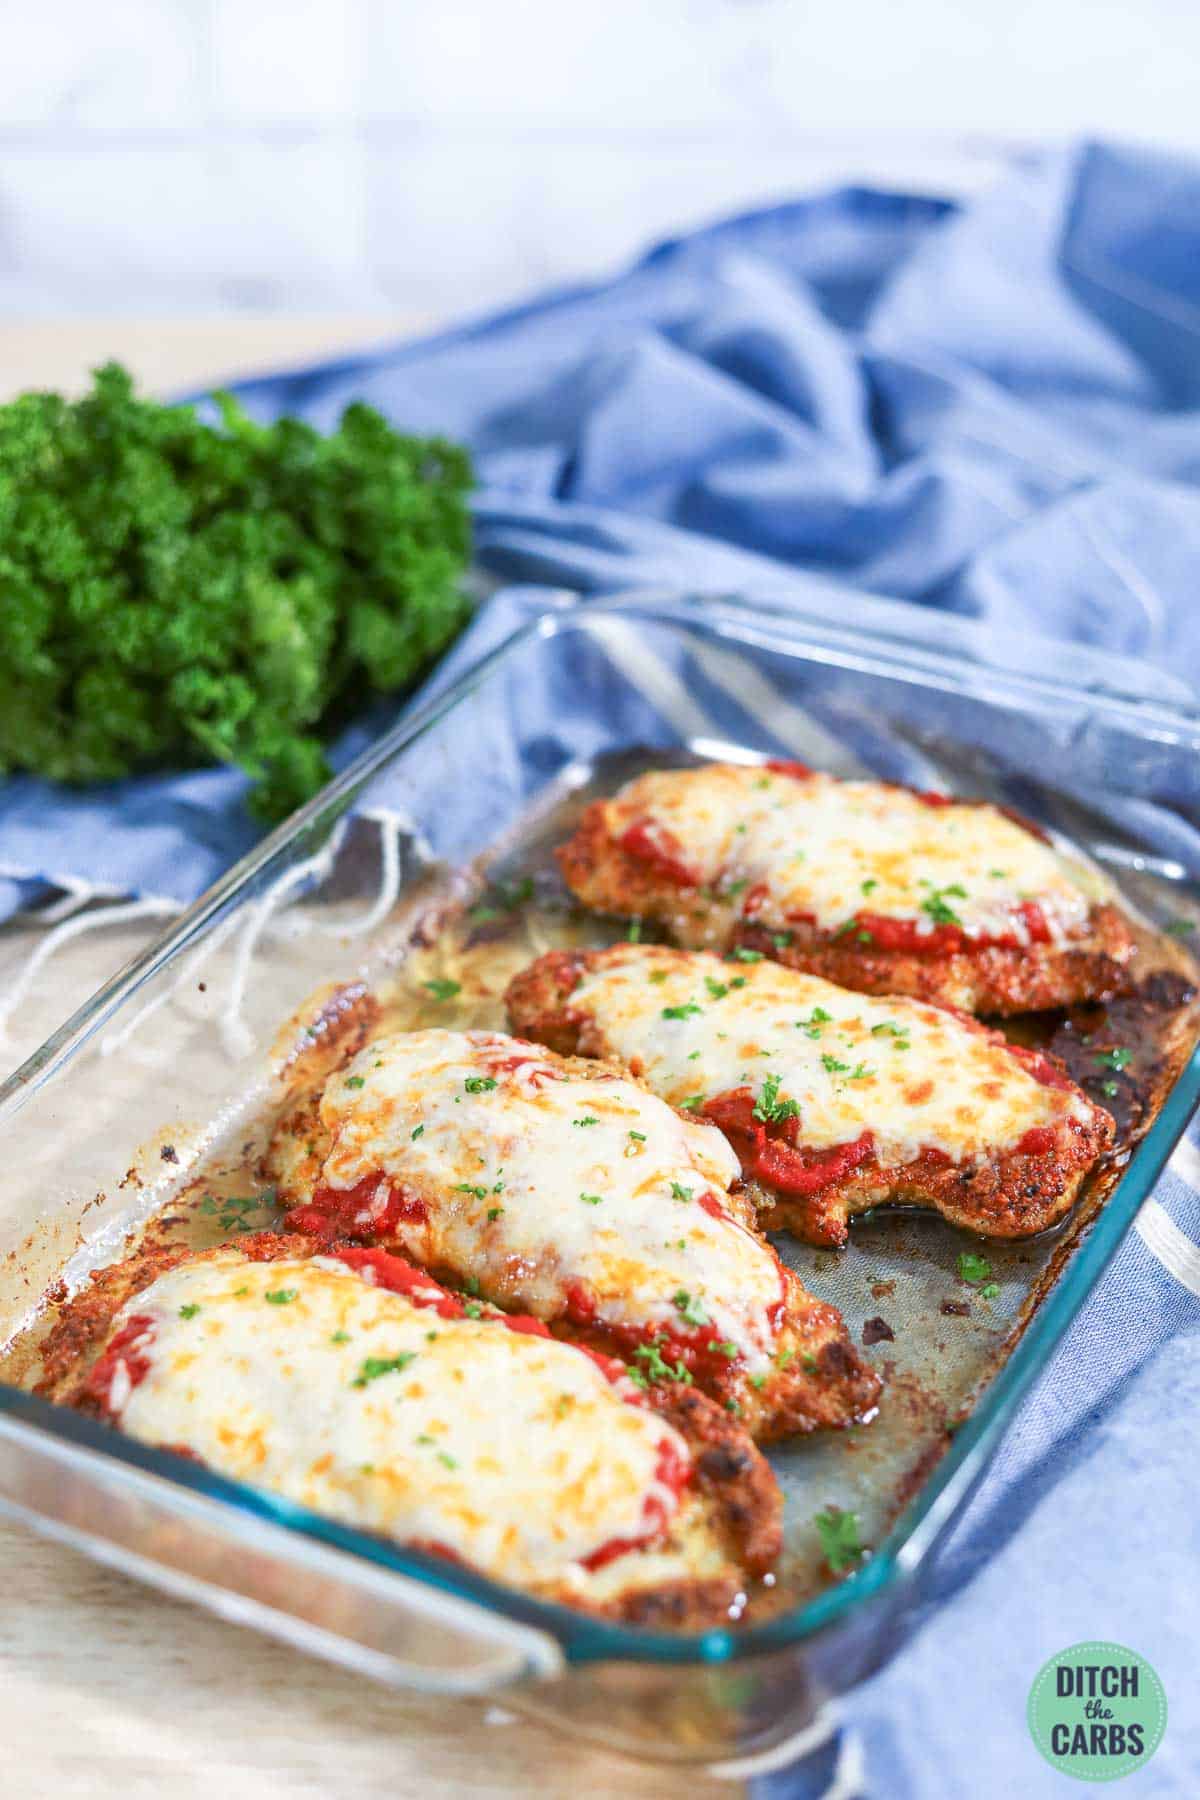 Baking dish filled with 4 servings of keto chicken parm topped with marina and melted cheese